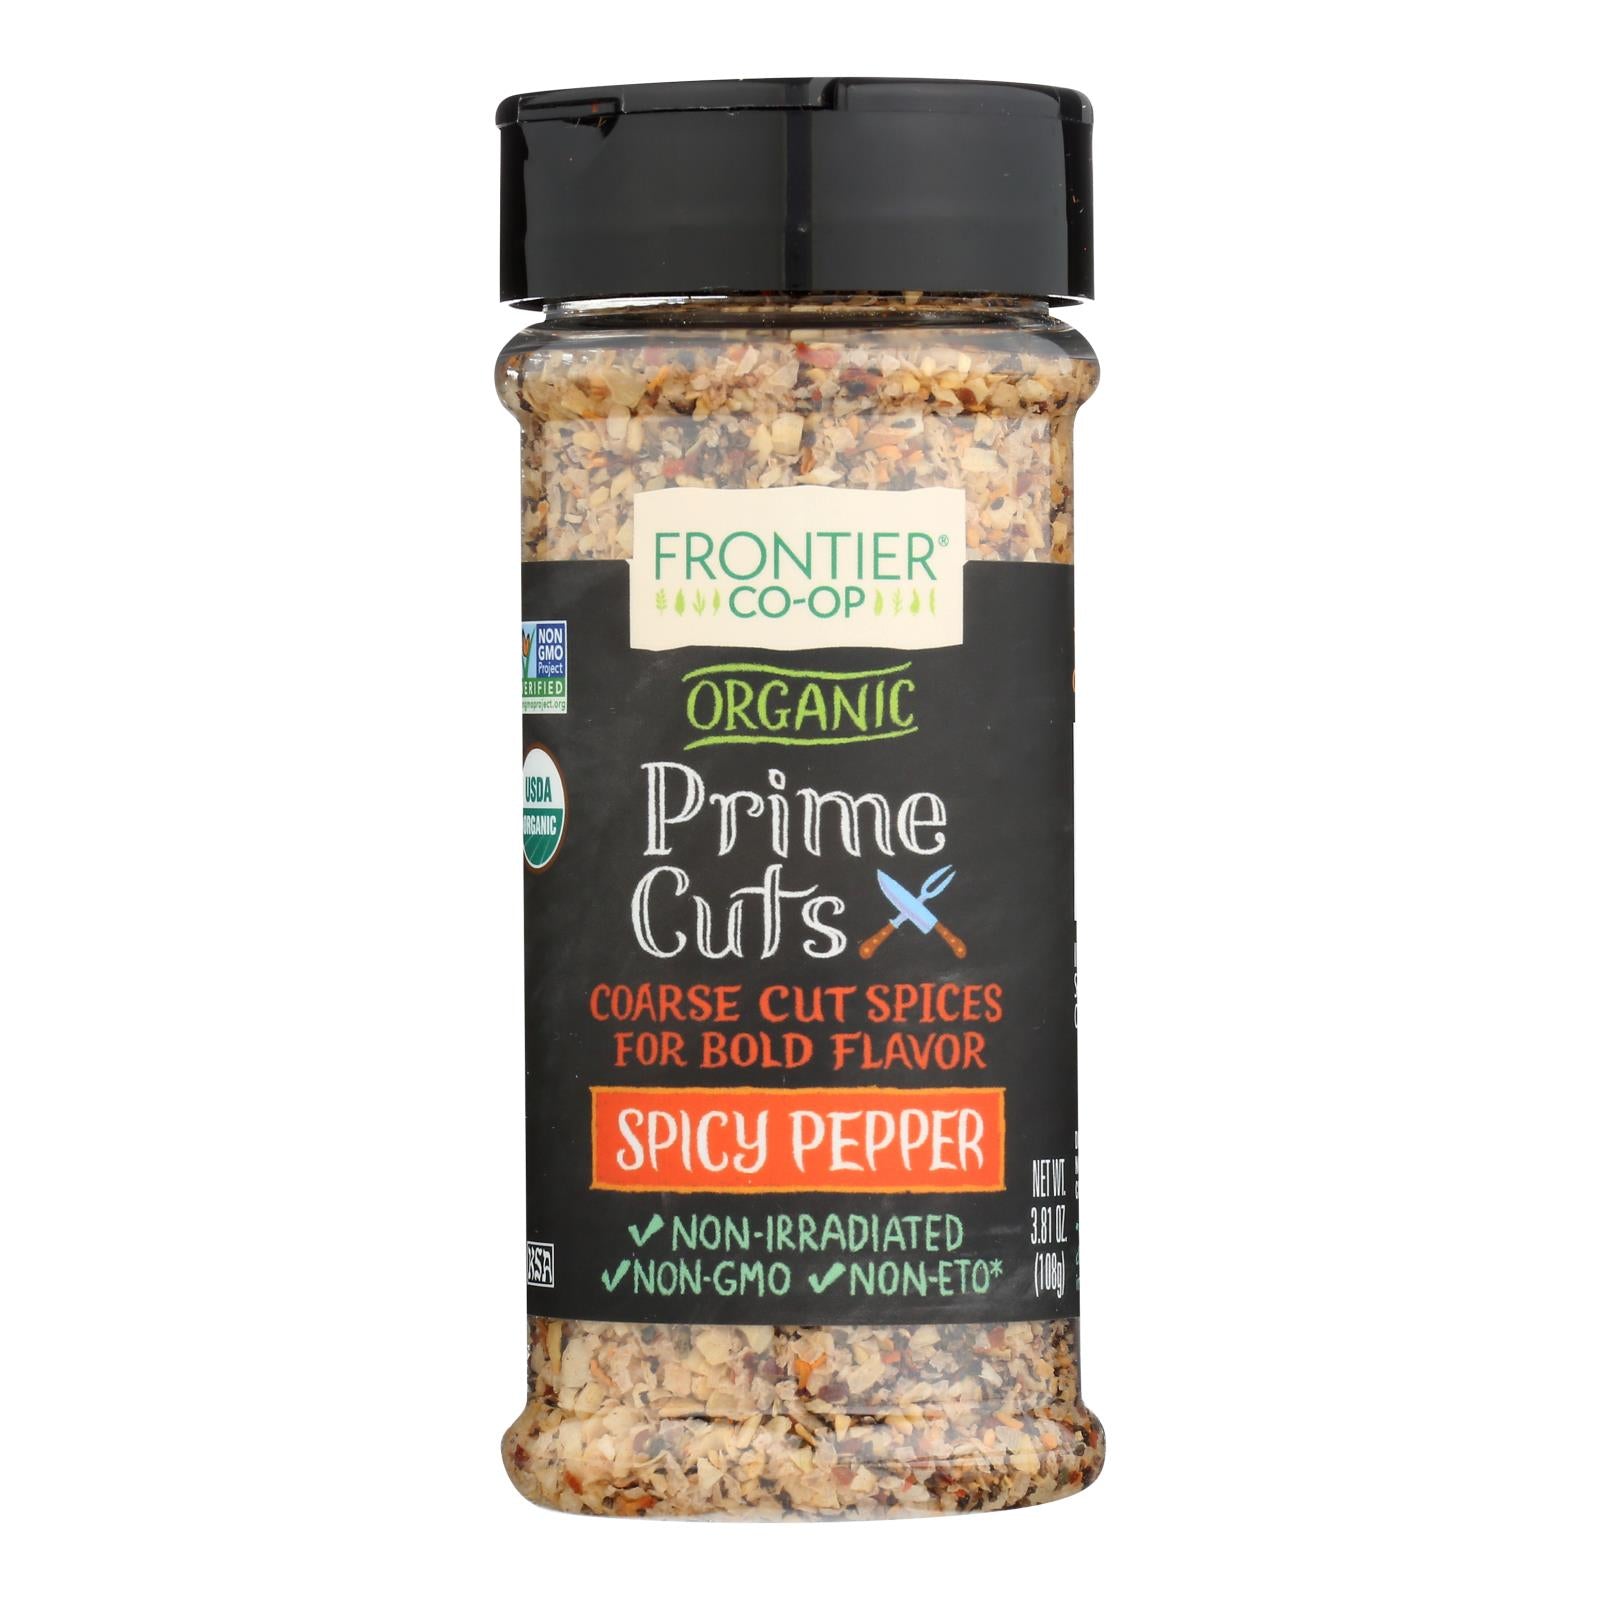 Frontier Natural Products Coop - Prime Cut Spicy Pepper - 1 Each-3.81 Oz